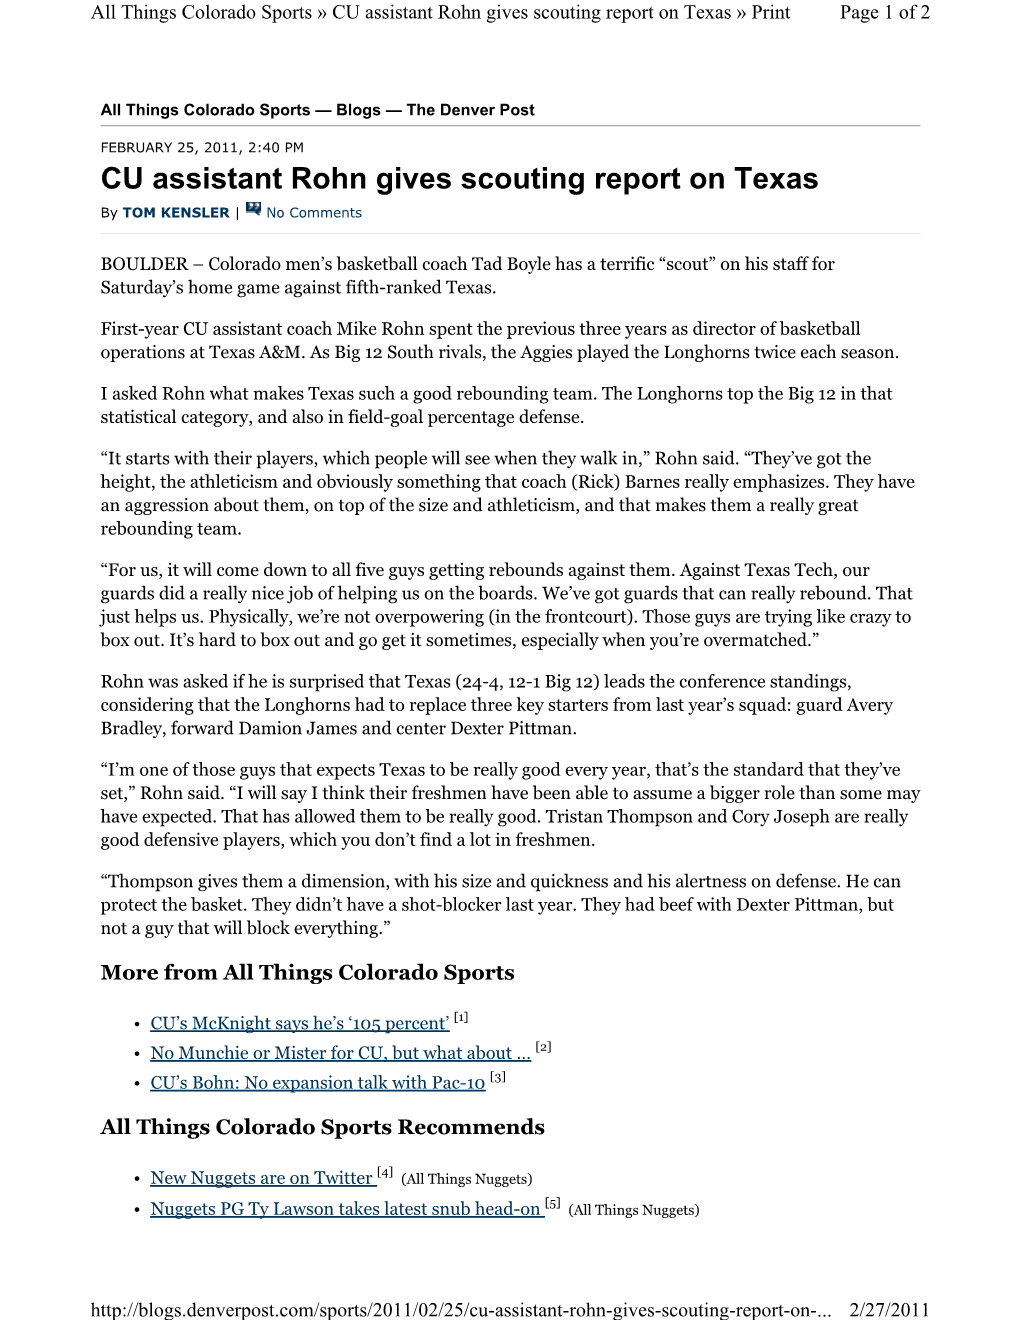 CU Assistant Rohn Gives Scouting Report on Texas » Print Page 1 of 2